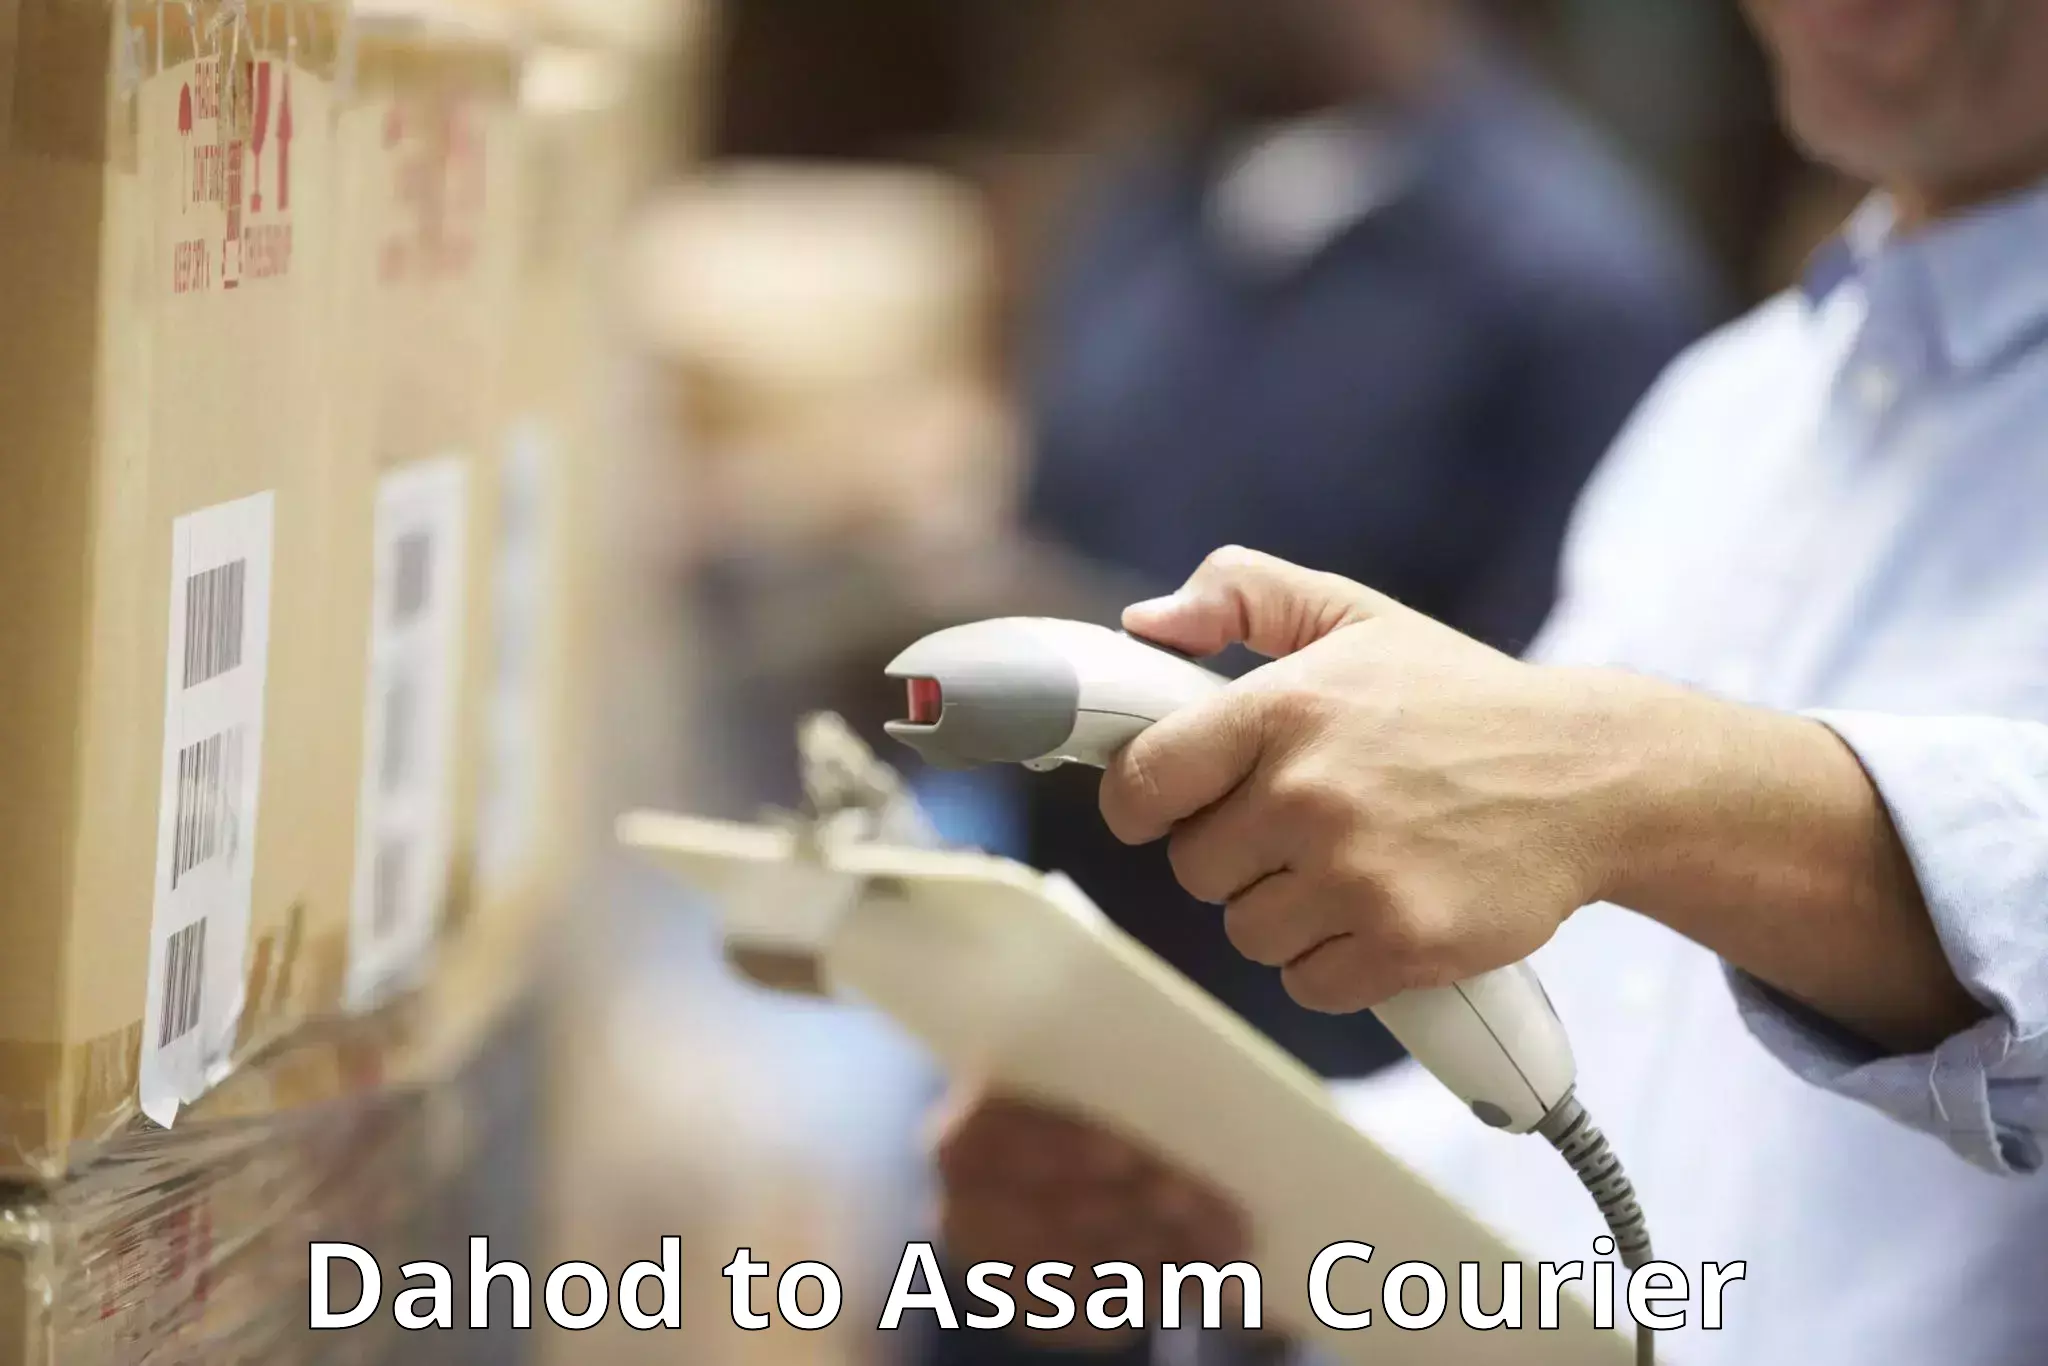 Luggage transport consultancy Dahod to Assam